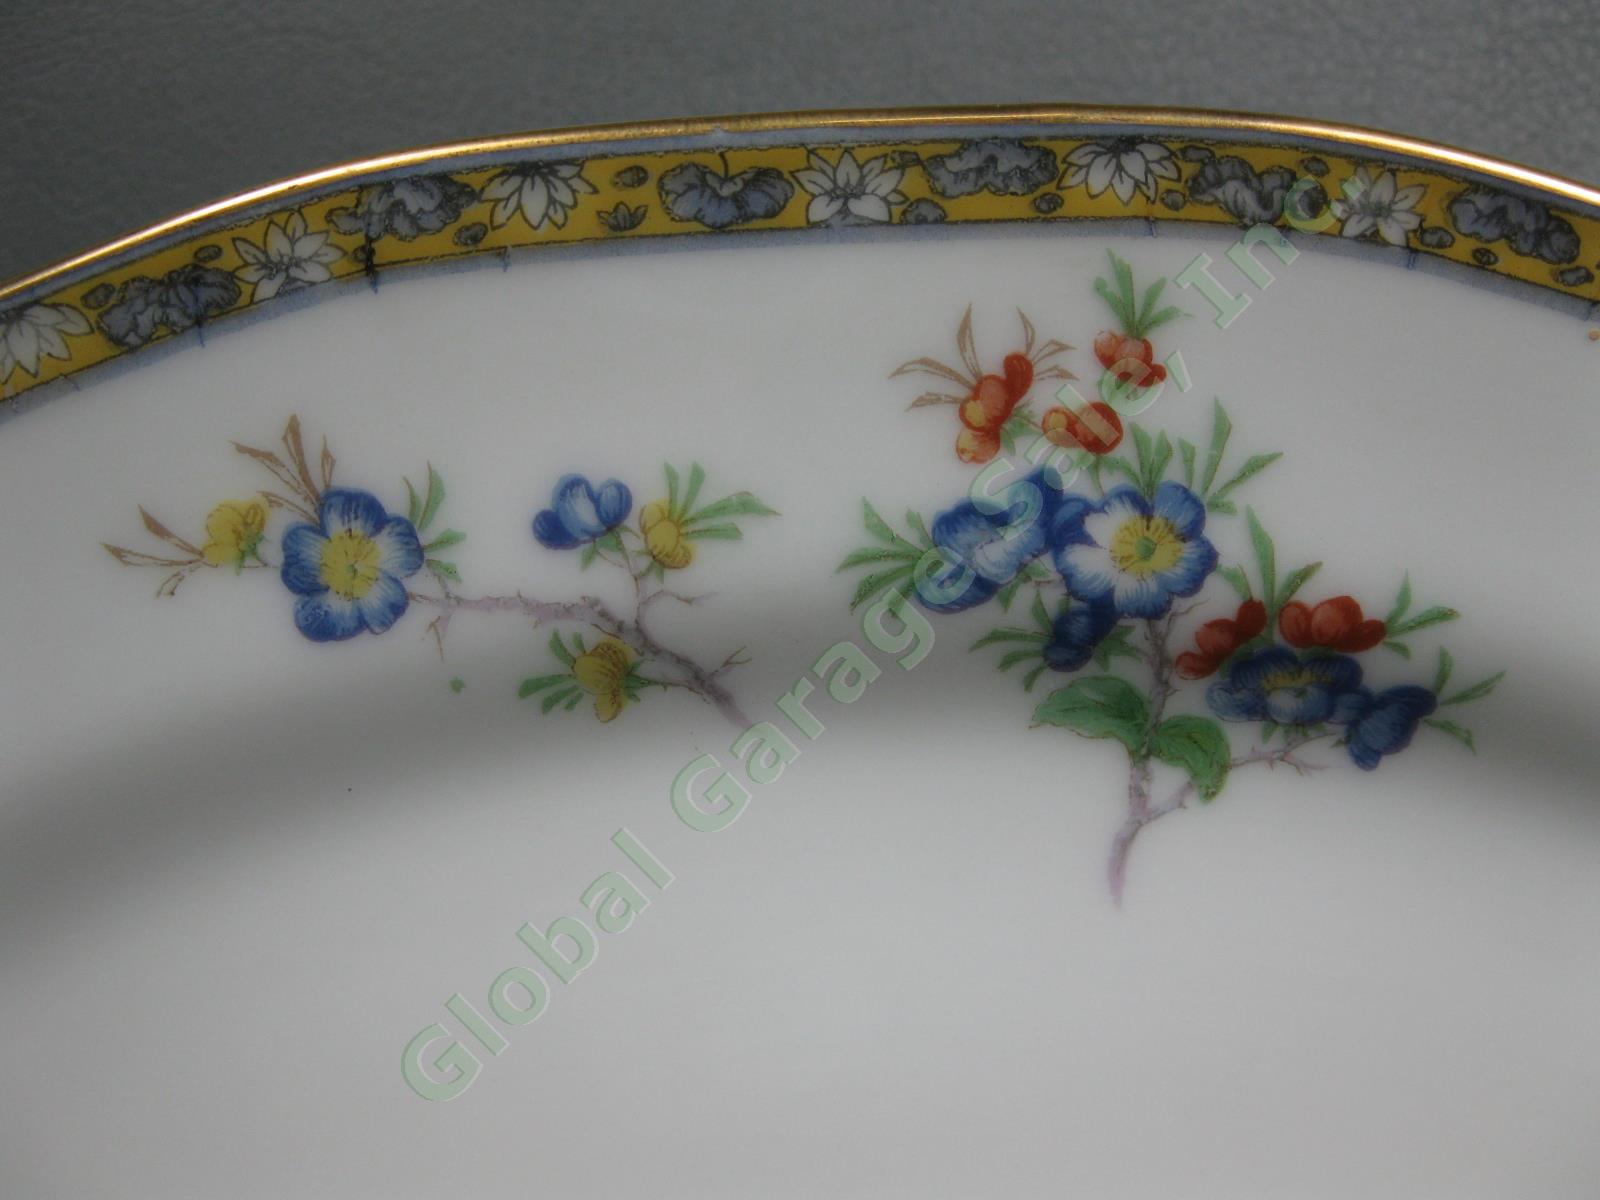 Theodore Haviland Montreux Mongolia 11" Oval Serving Platter Floral Tray Limoges 2